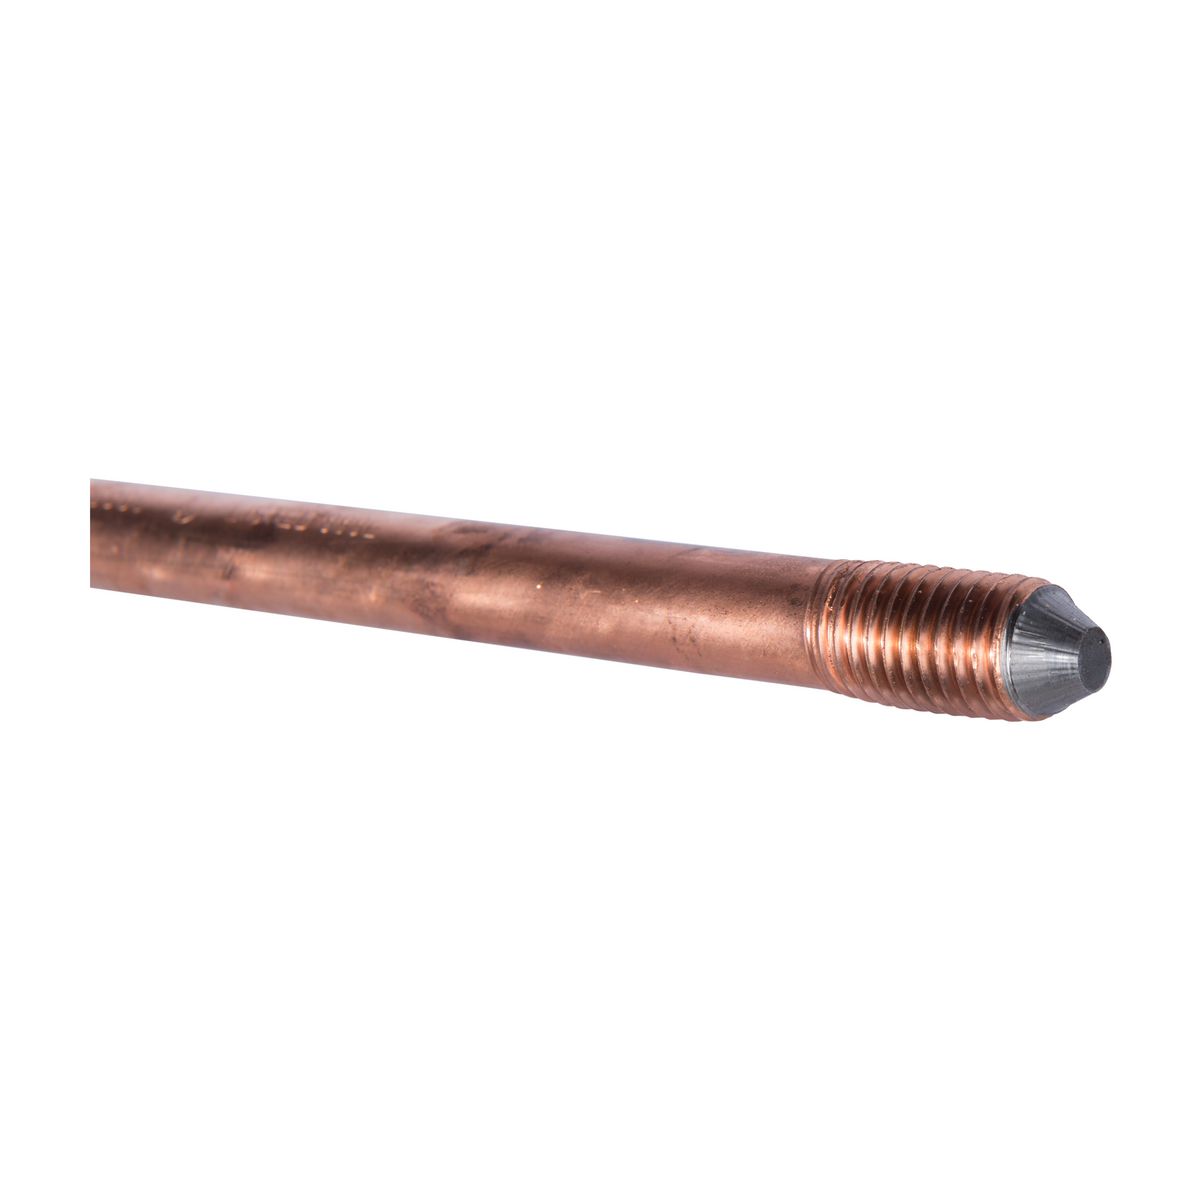 10mil COPPER-BONDED GROUND ROD, 3/4in x 6ft, THREADED ENDS, C633460